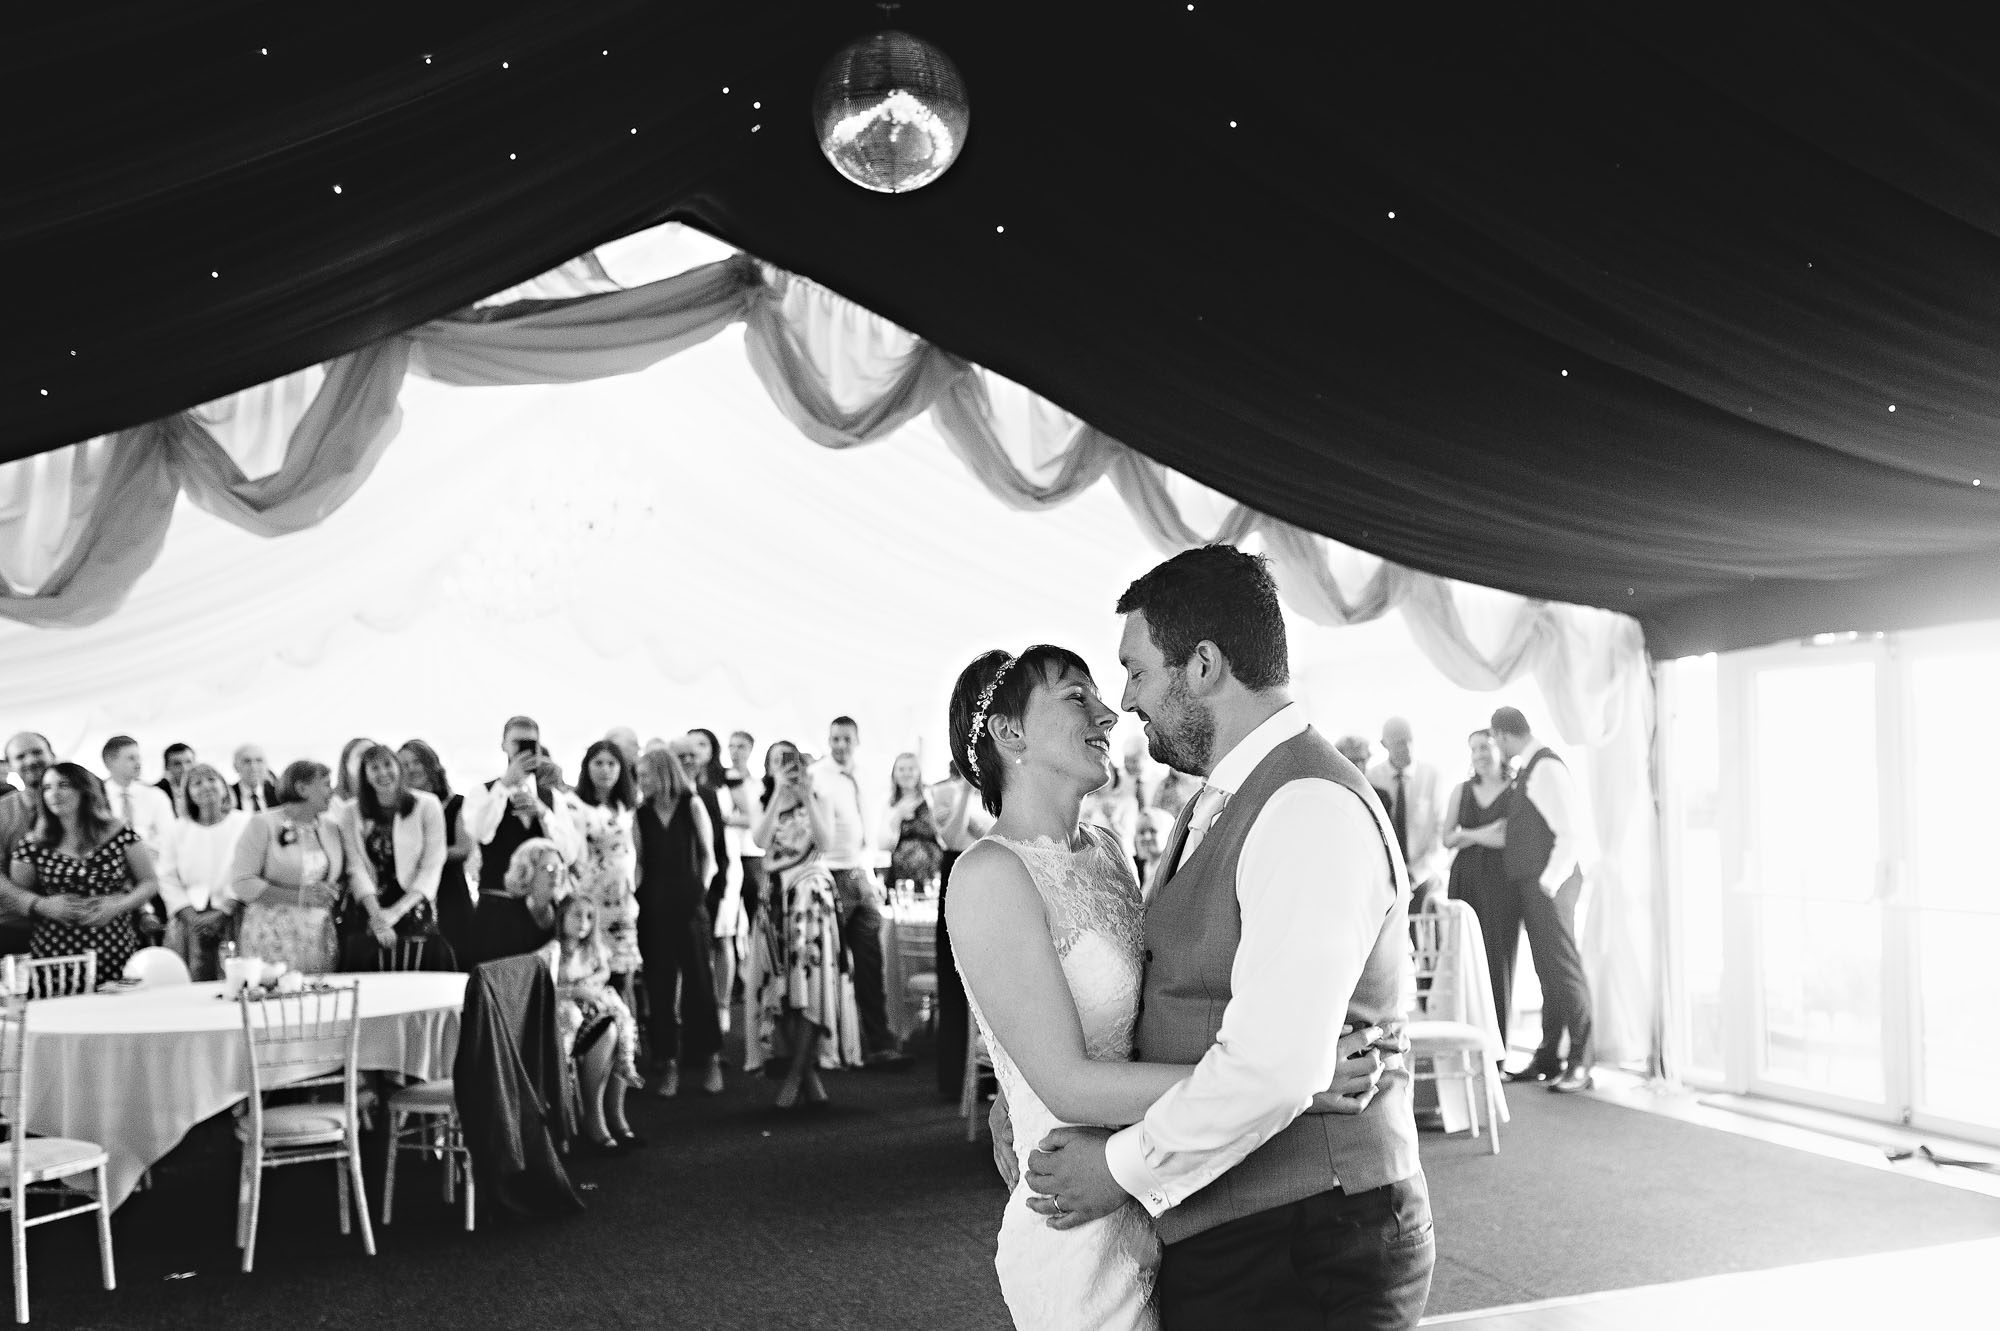 Couple gazing into each others eyes during the first dance with guests watching in background